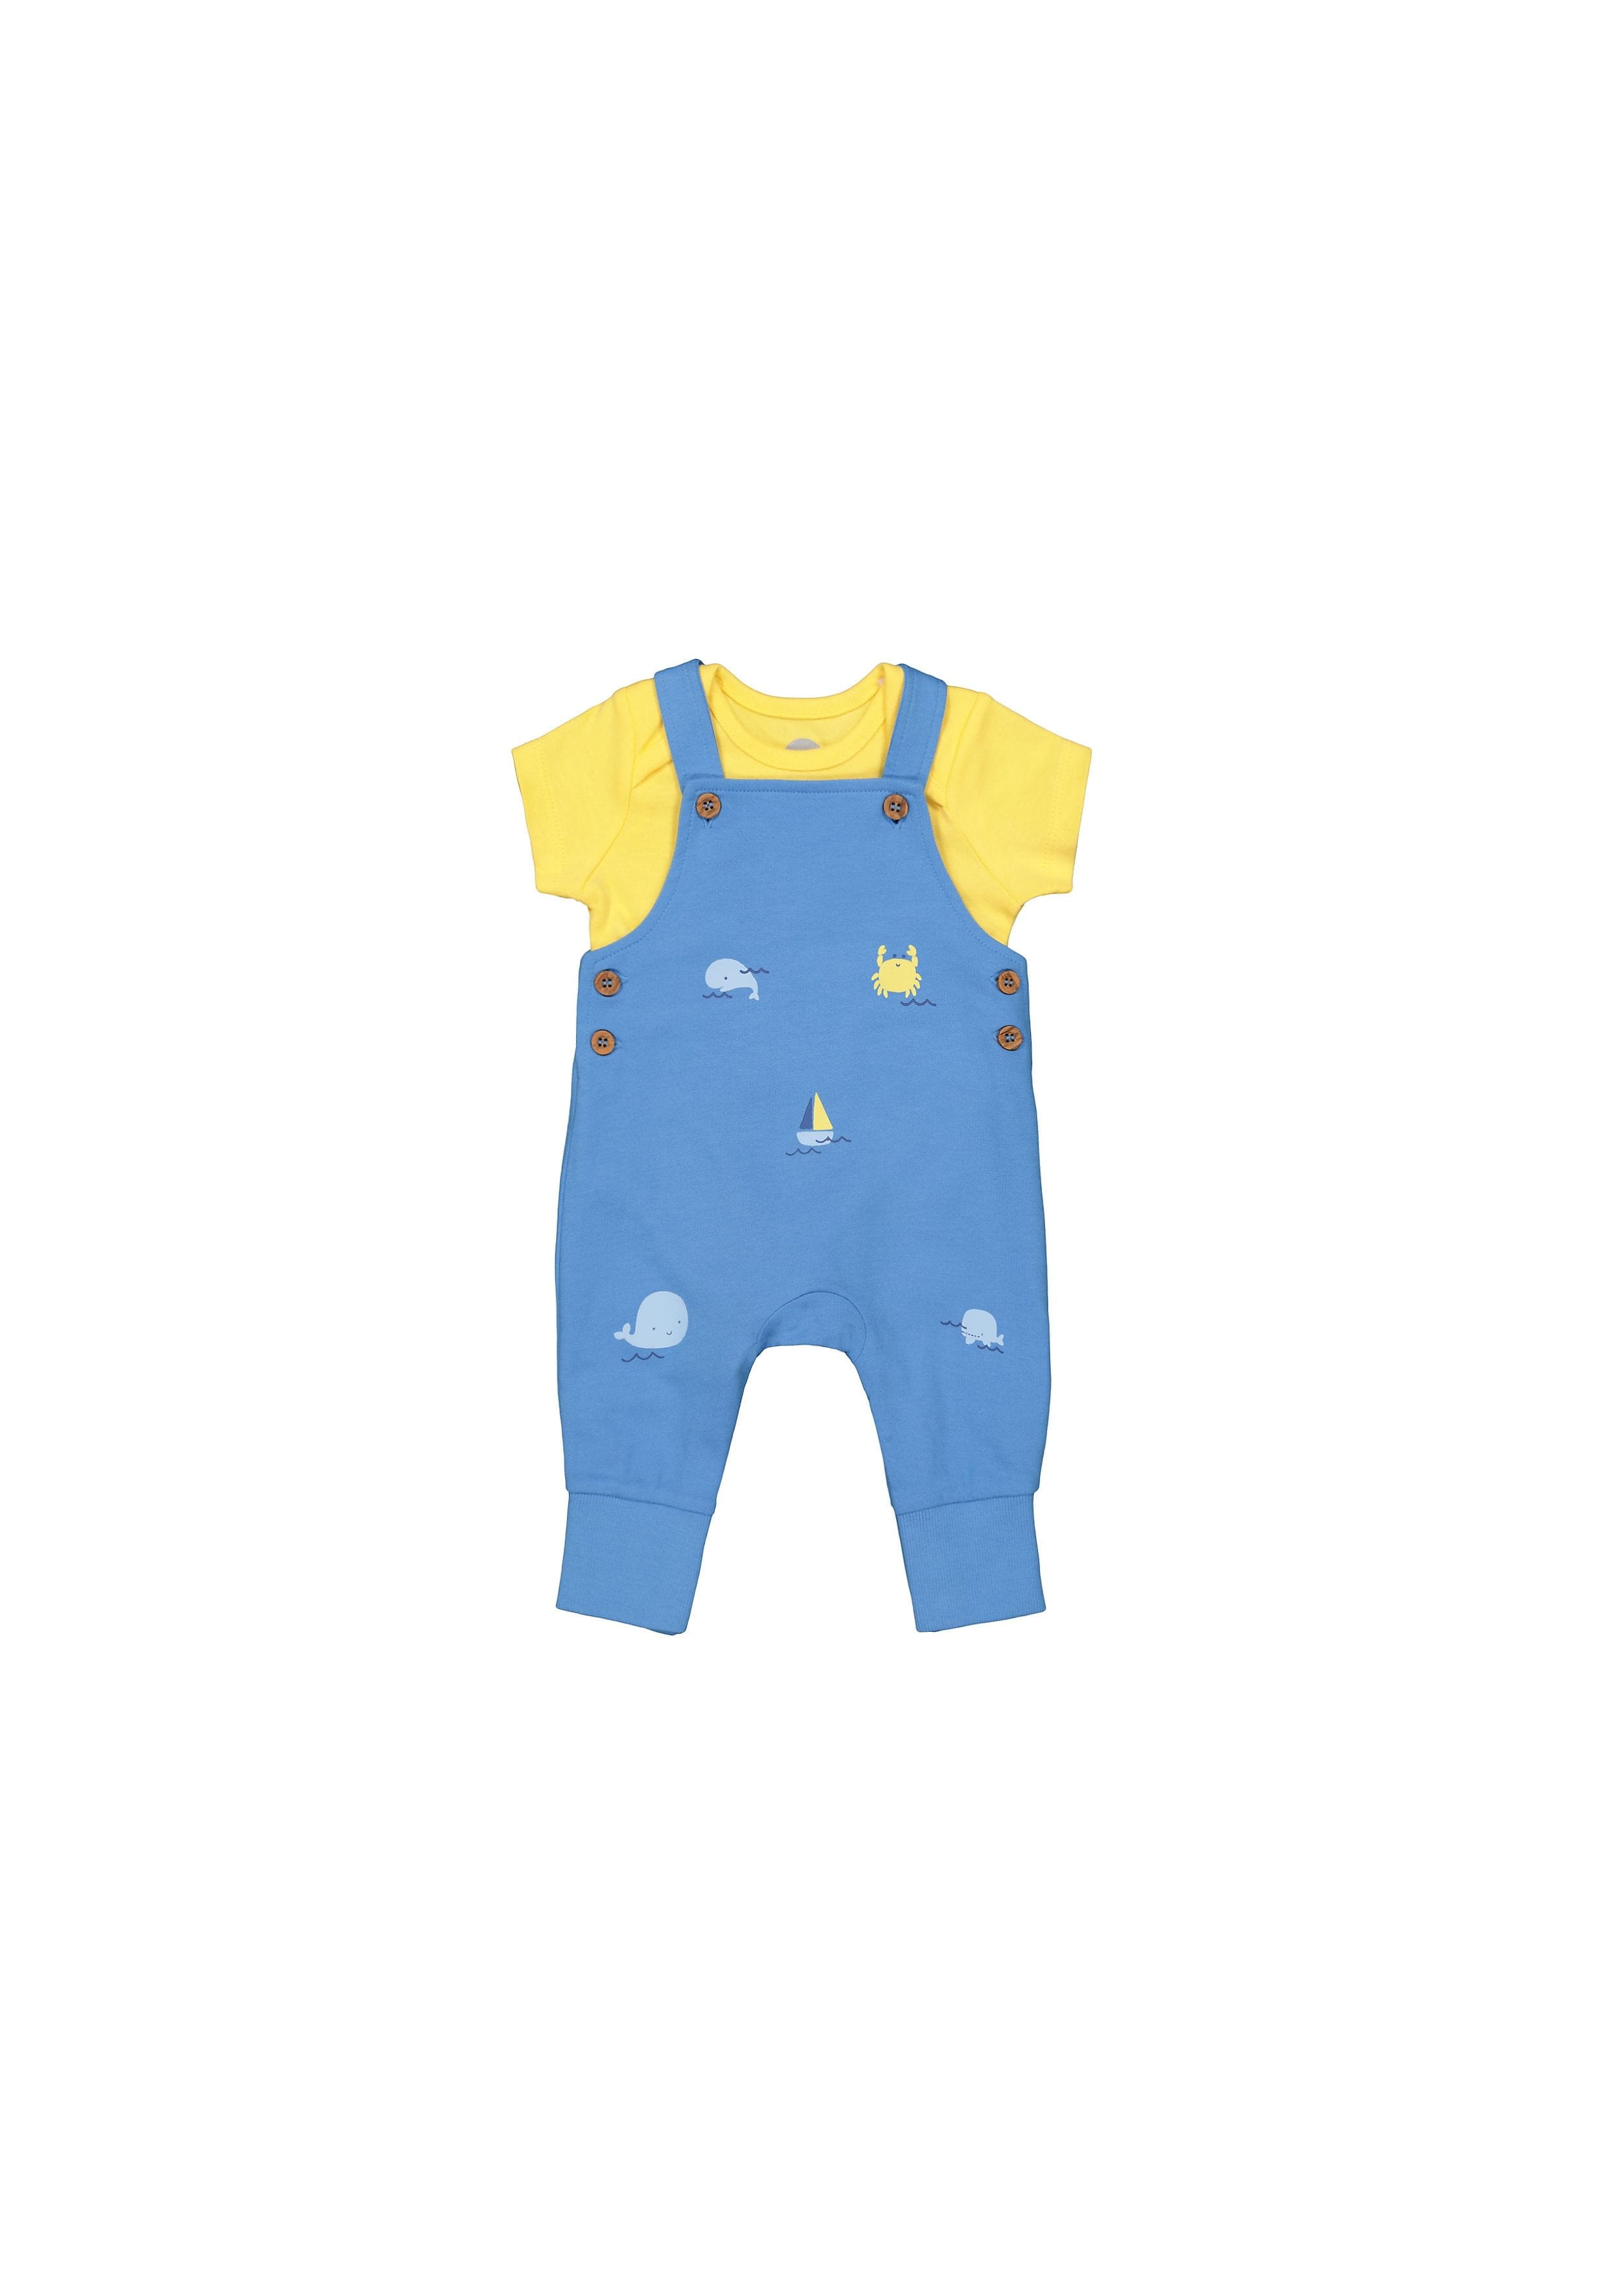 Mothercare | Boys Half Sleeves Dungaree Set Whale Print - Yellow Blue 0